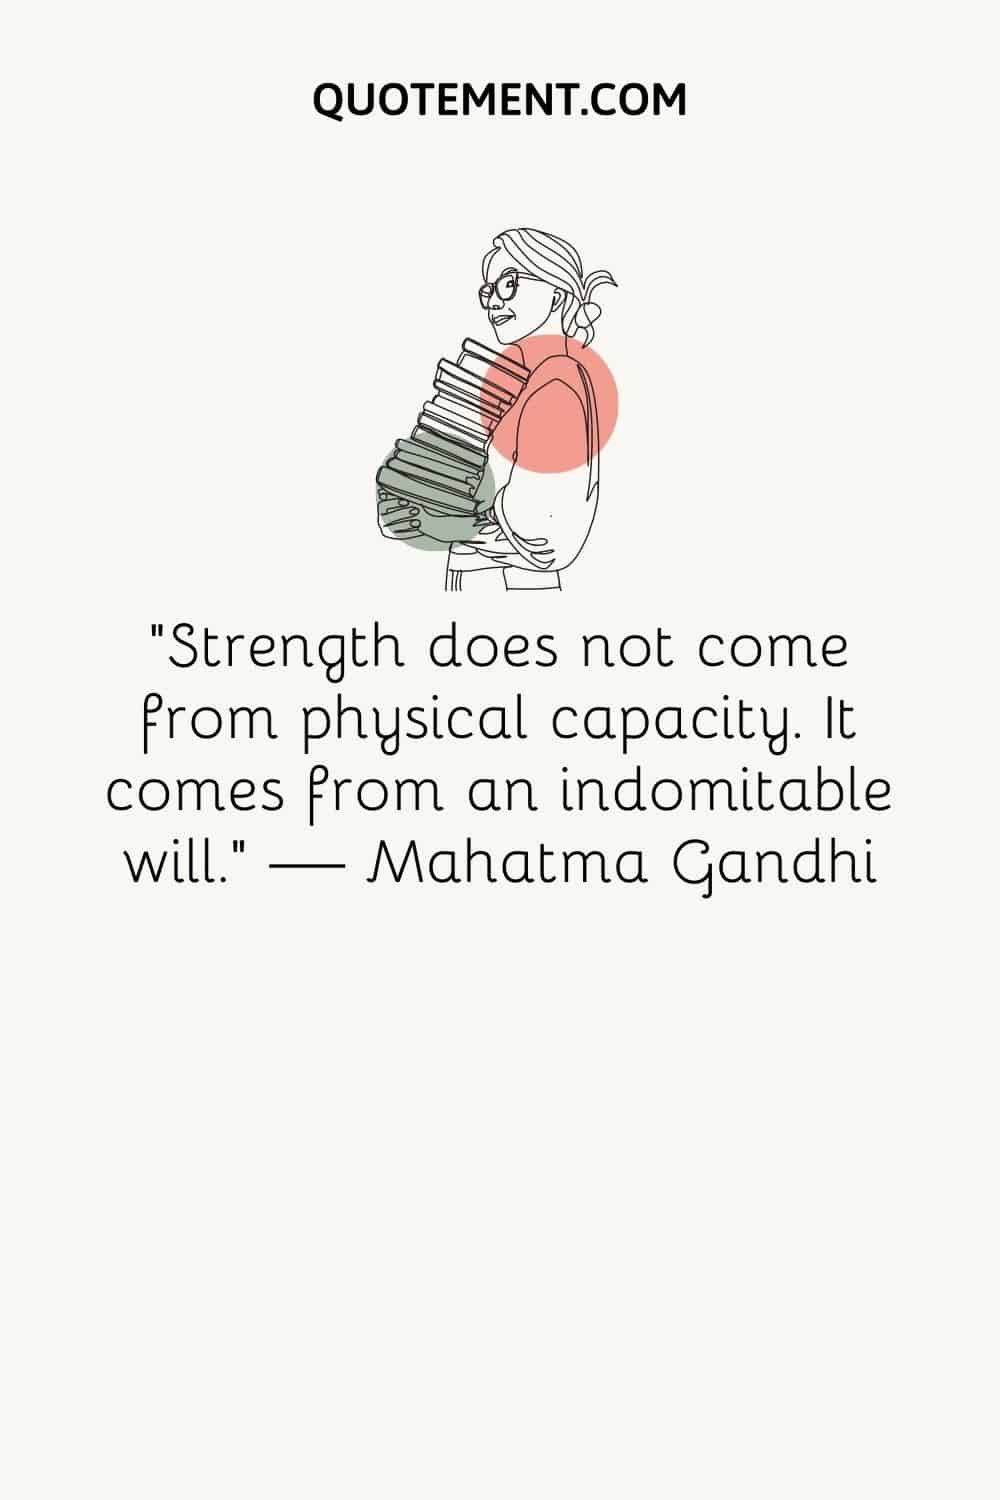 “Strength does not come from physical capacity. It comes from an indomitable will.” ― Mahatma Gandhi